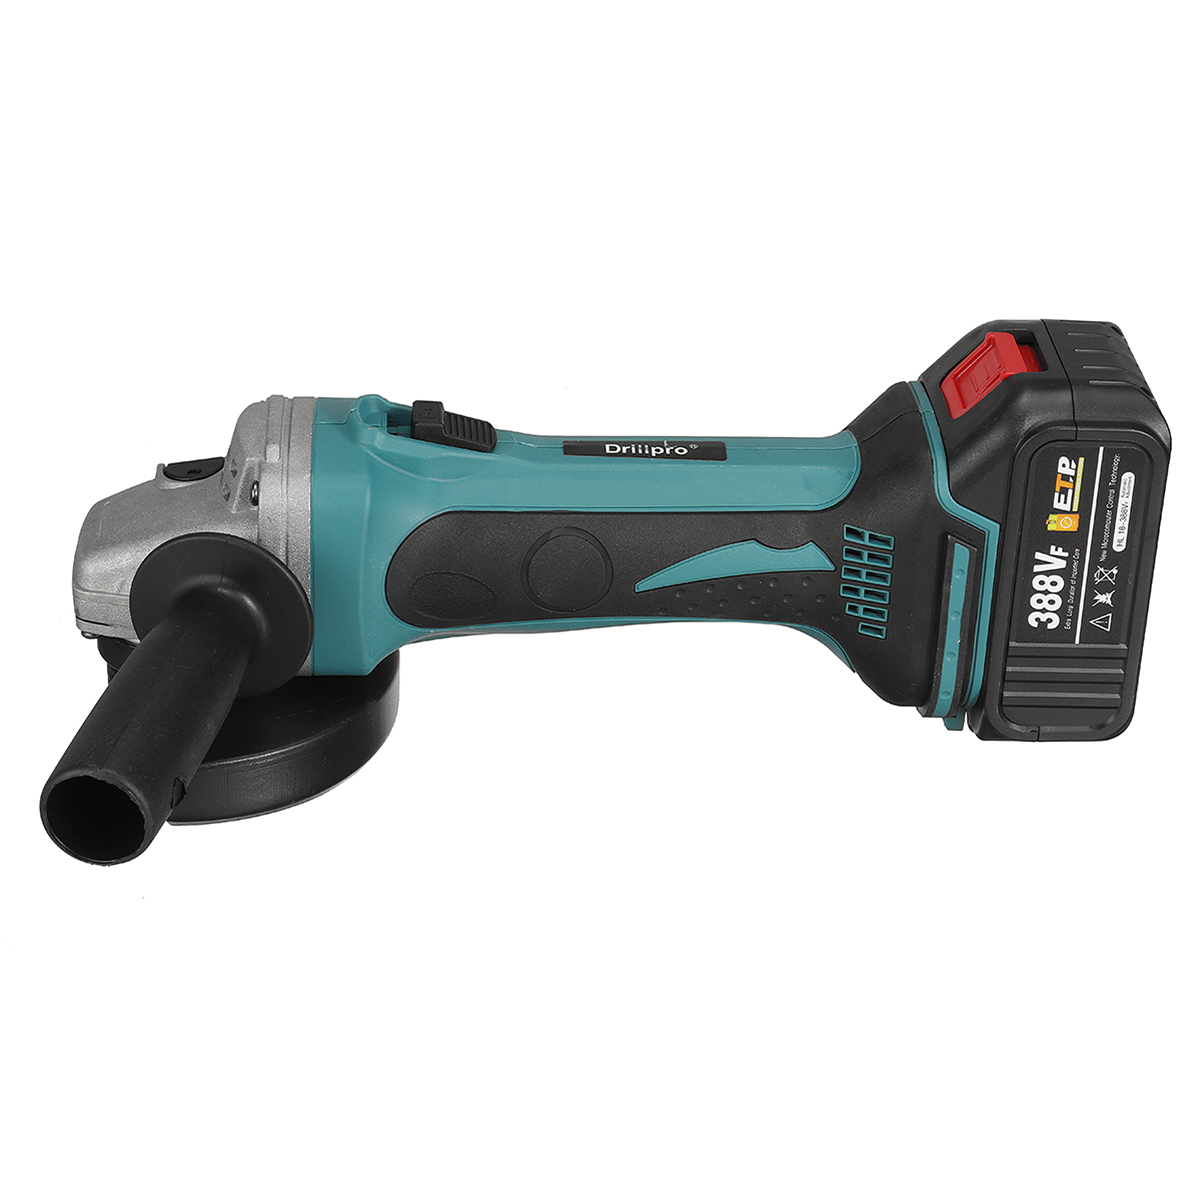 Drillpro-388VF-125mm-BlueBalck-Brushless-Motor-8500rpm-800W-Compact-Lithium-Electric-Polisher-1962696-9